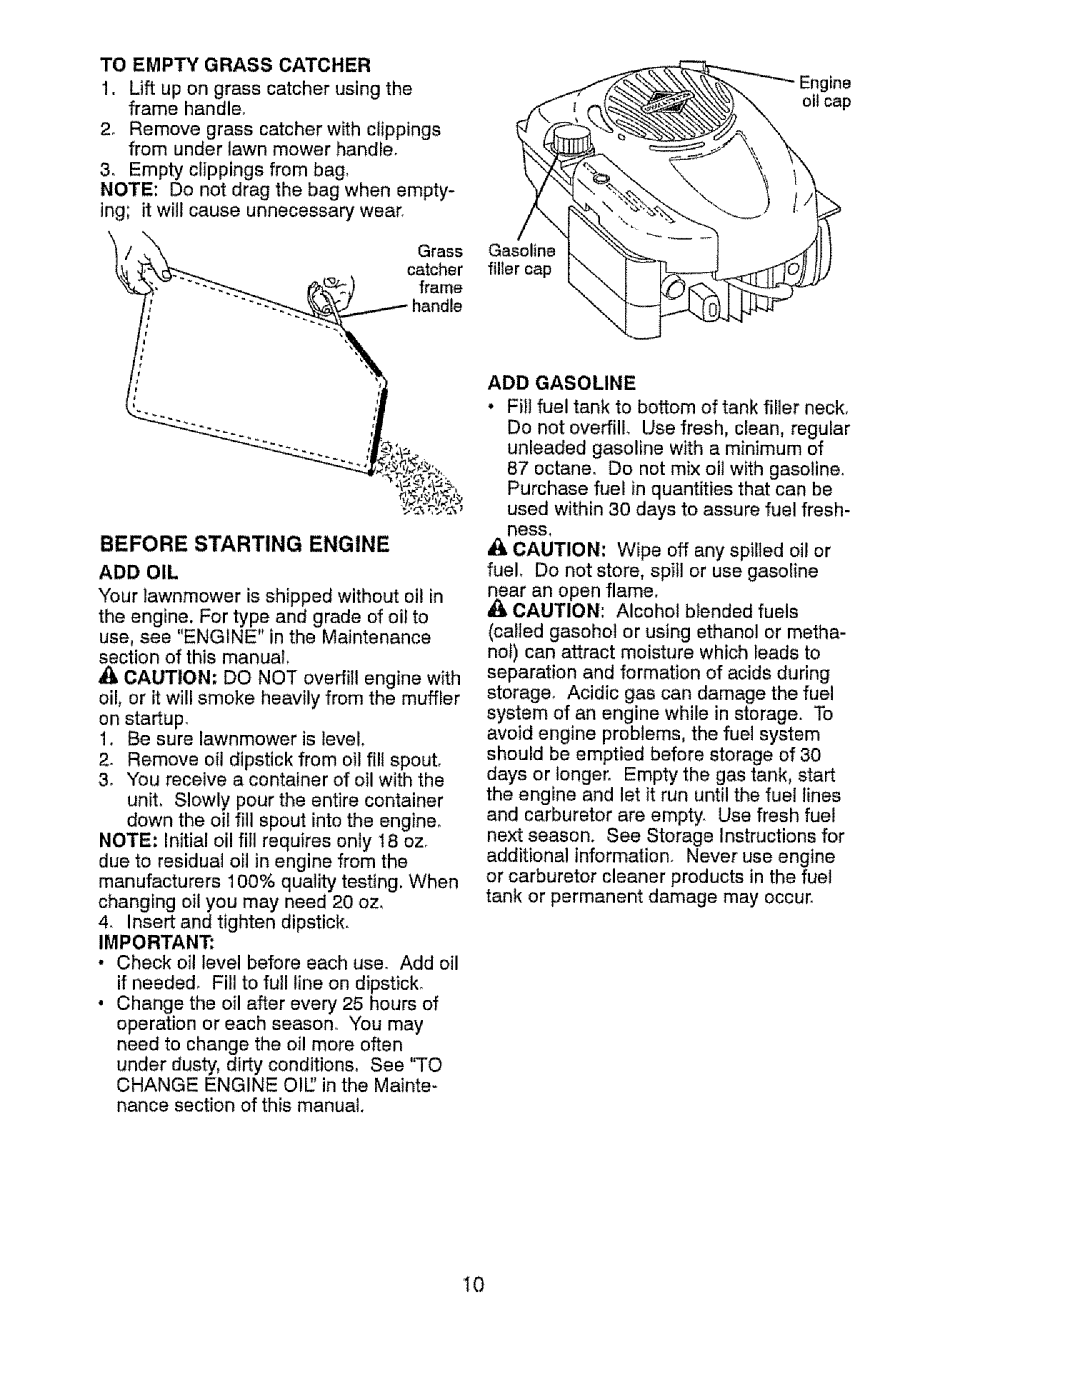 Craftsman 917.37646 owner manual Before Starting Engine, To Empty Grass Catcher, Add Gasoline 